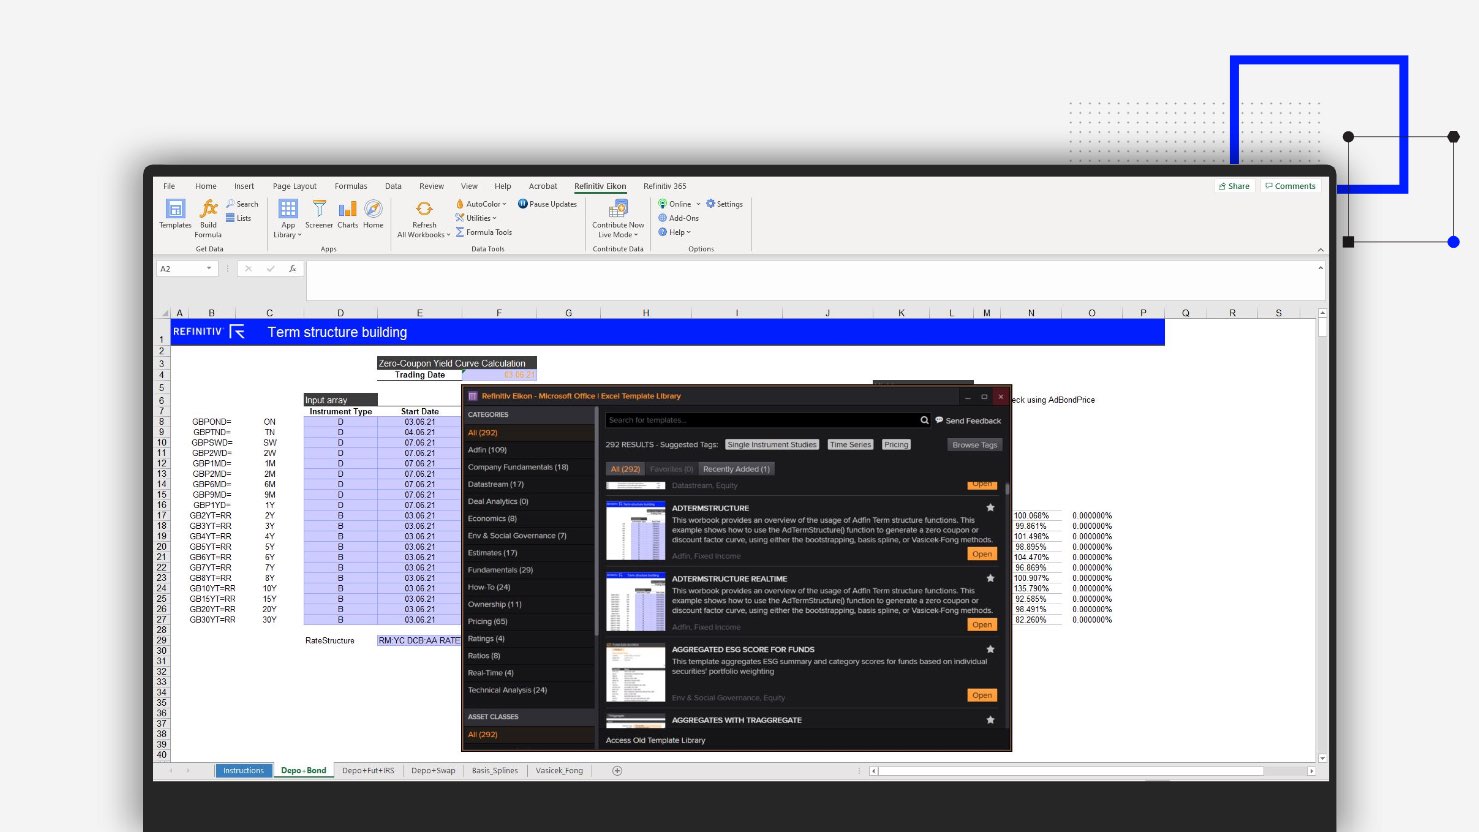 EIkon dashboard showing integration with microsoft excel